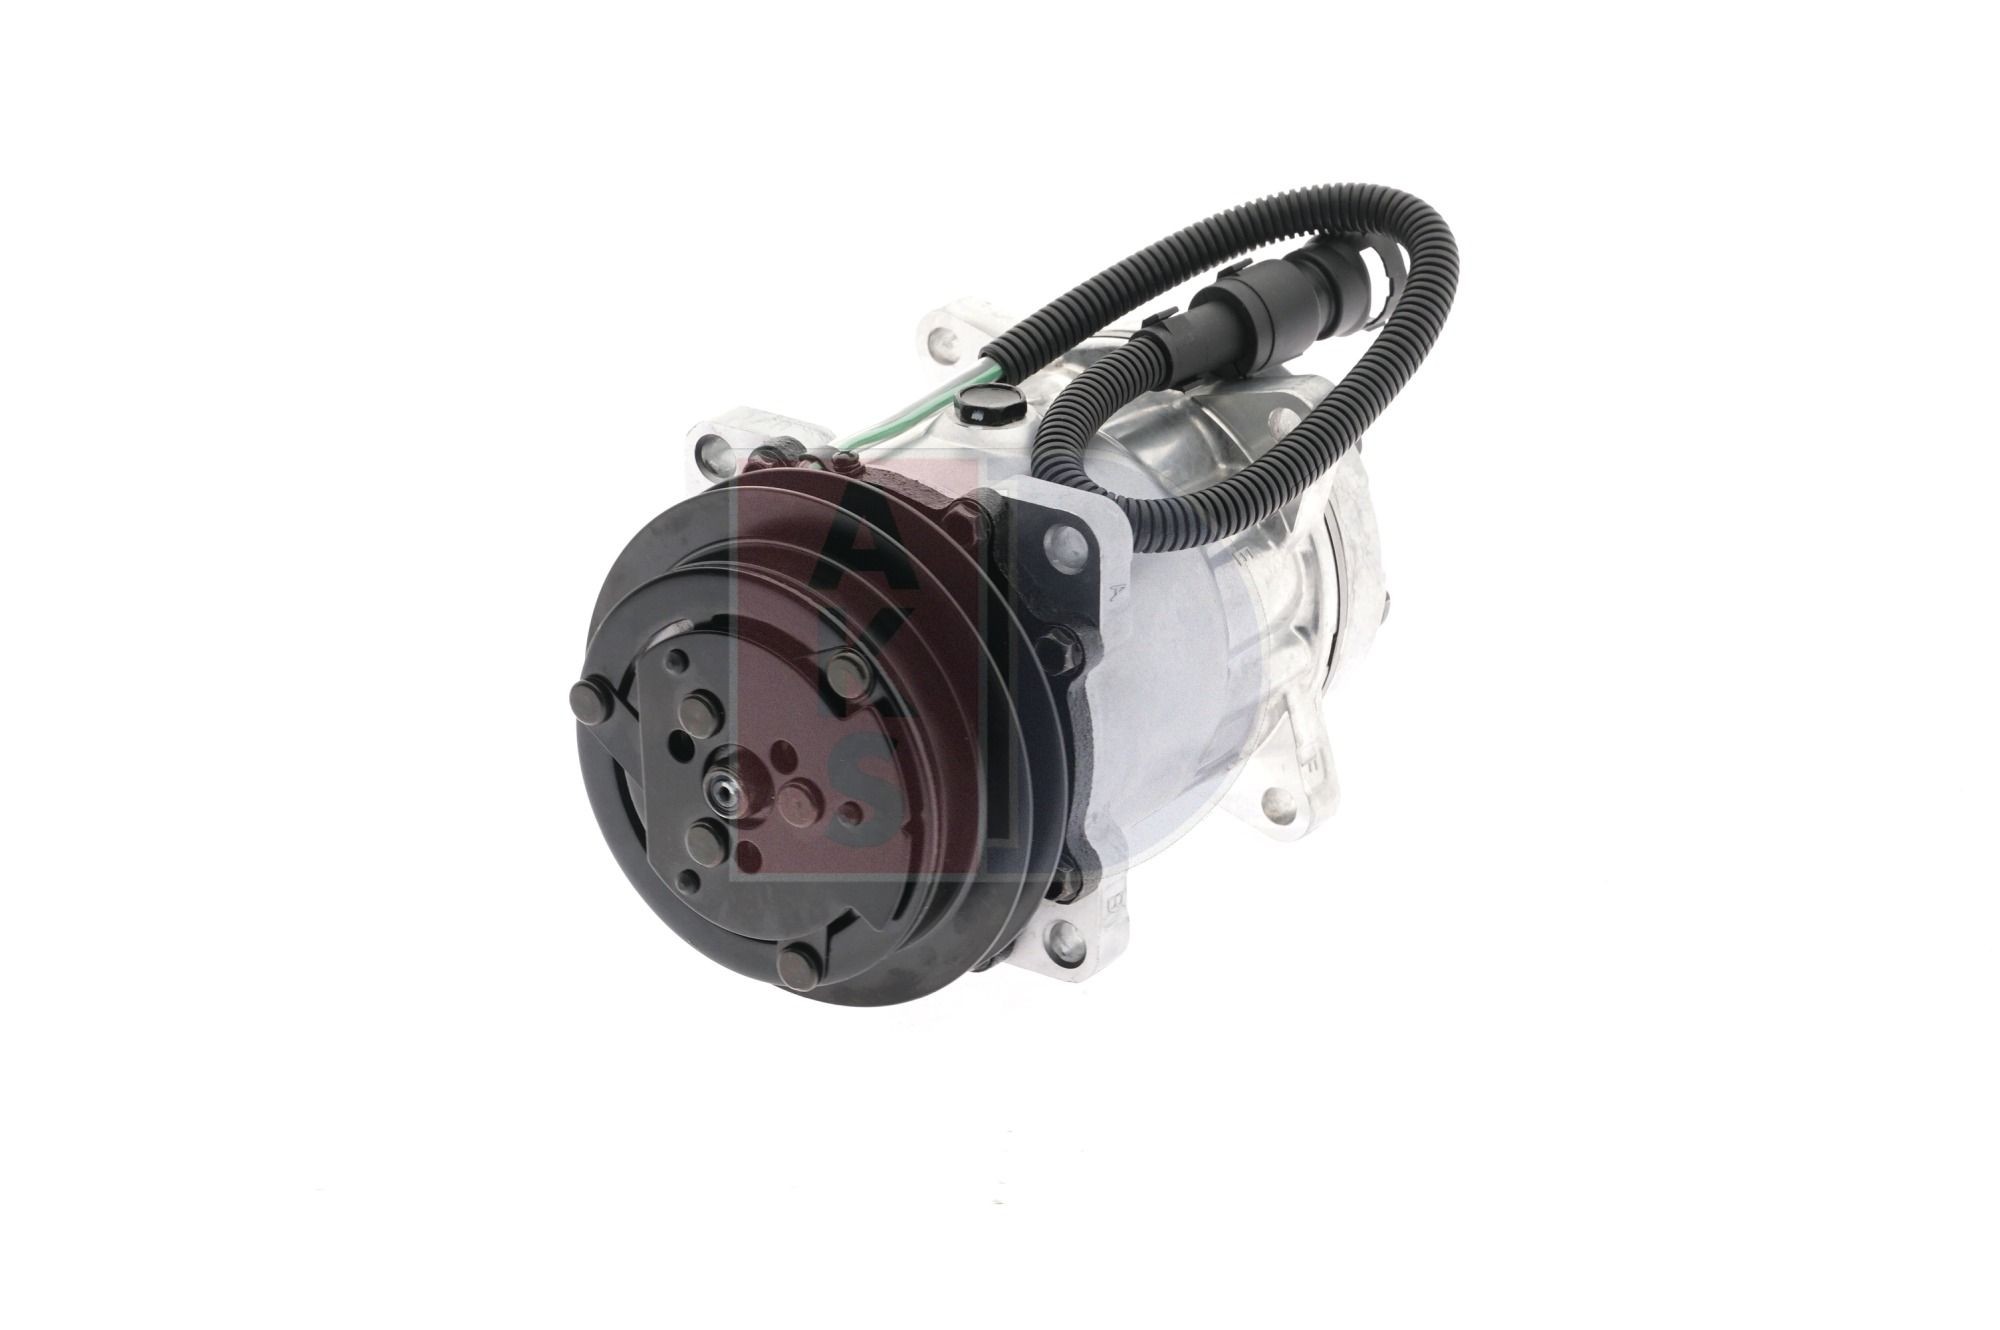 Air conditioning compressor 852865N from AKS DASIS